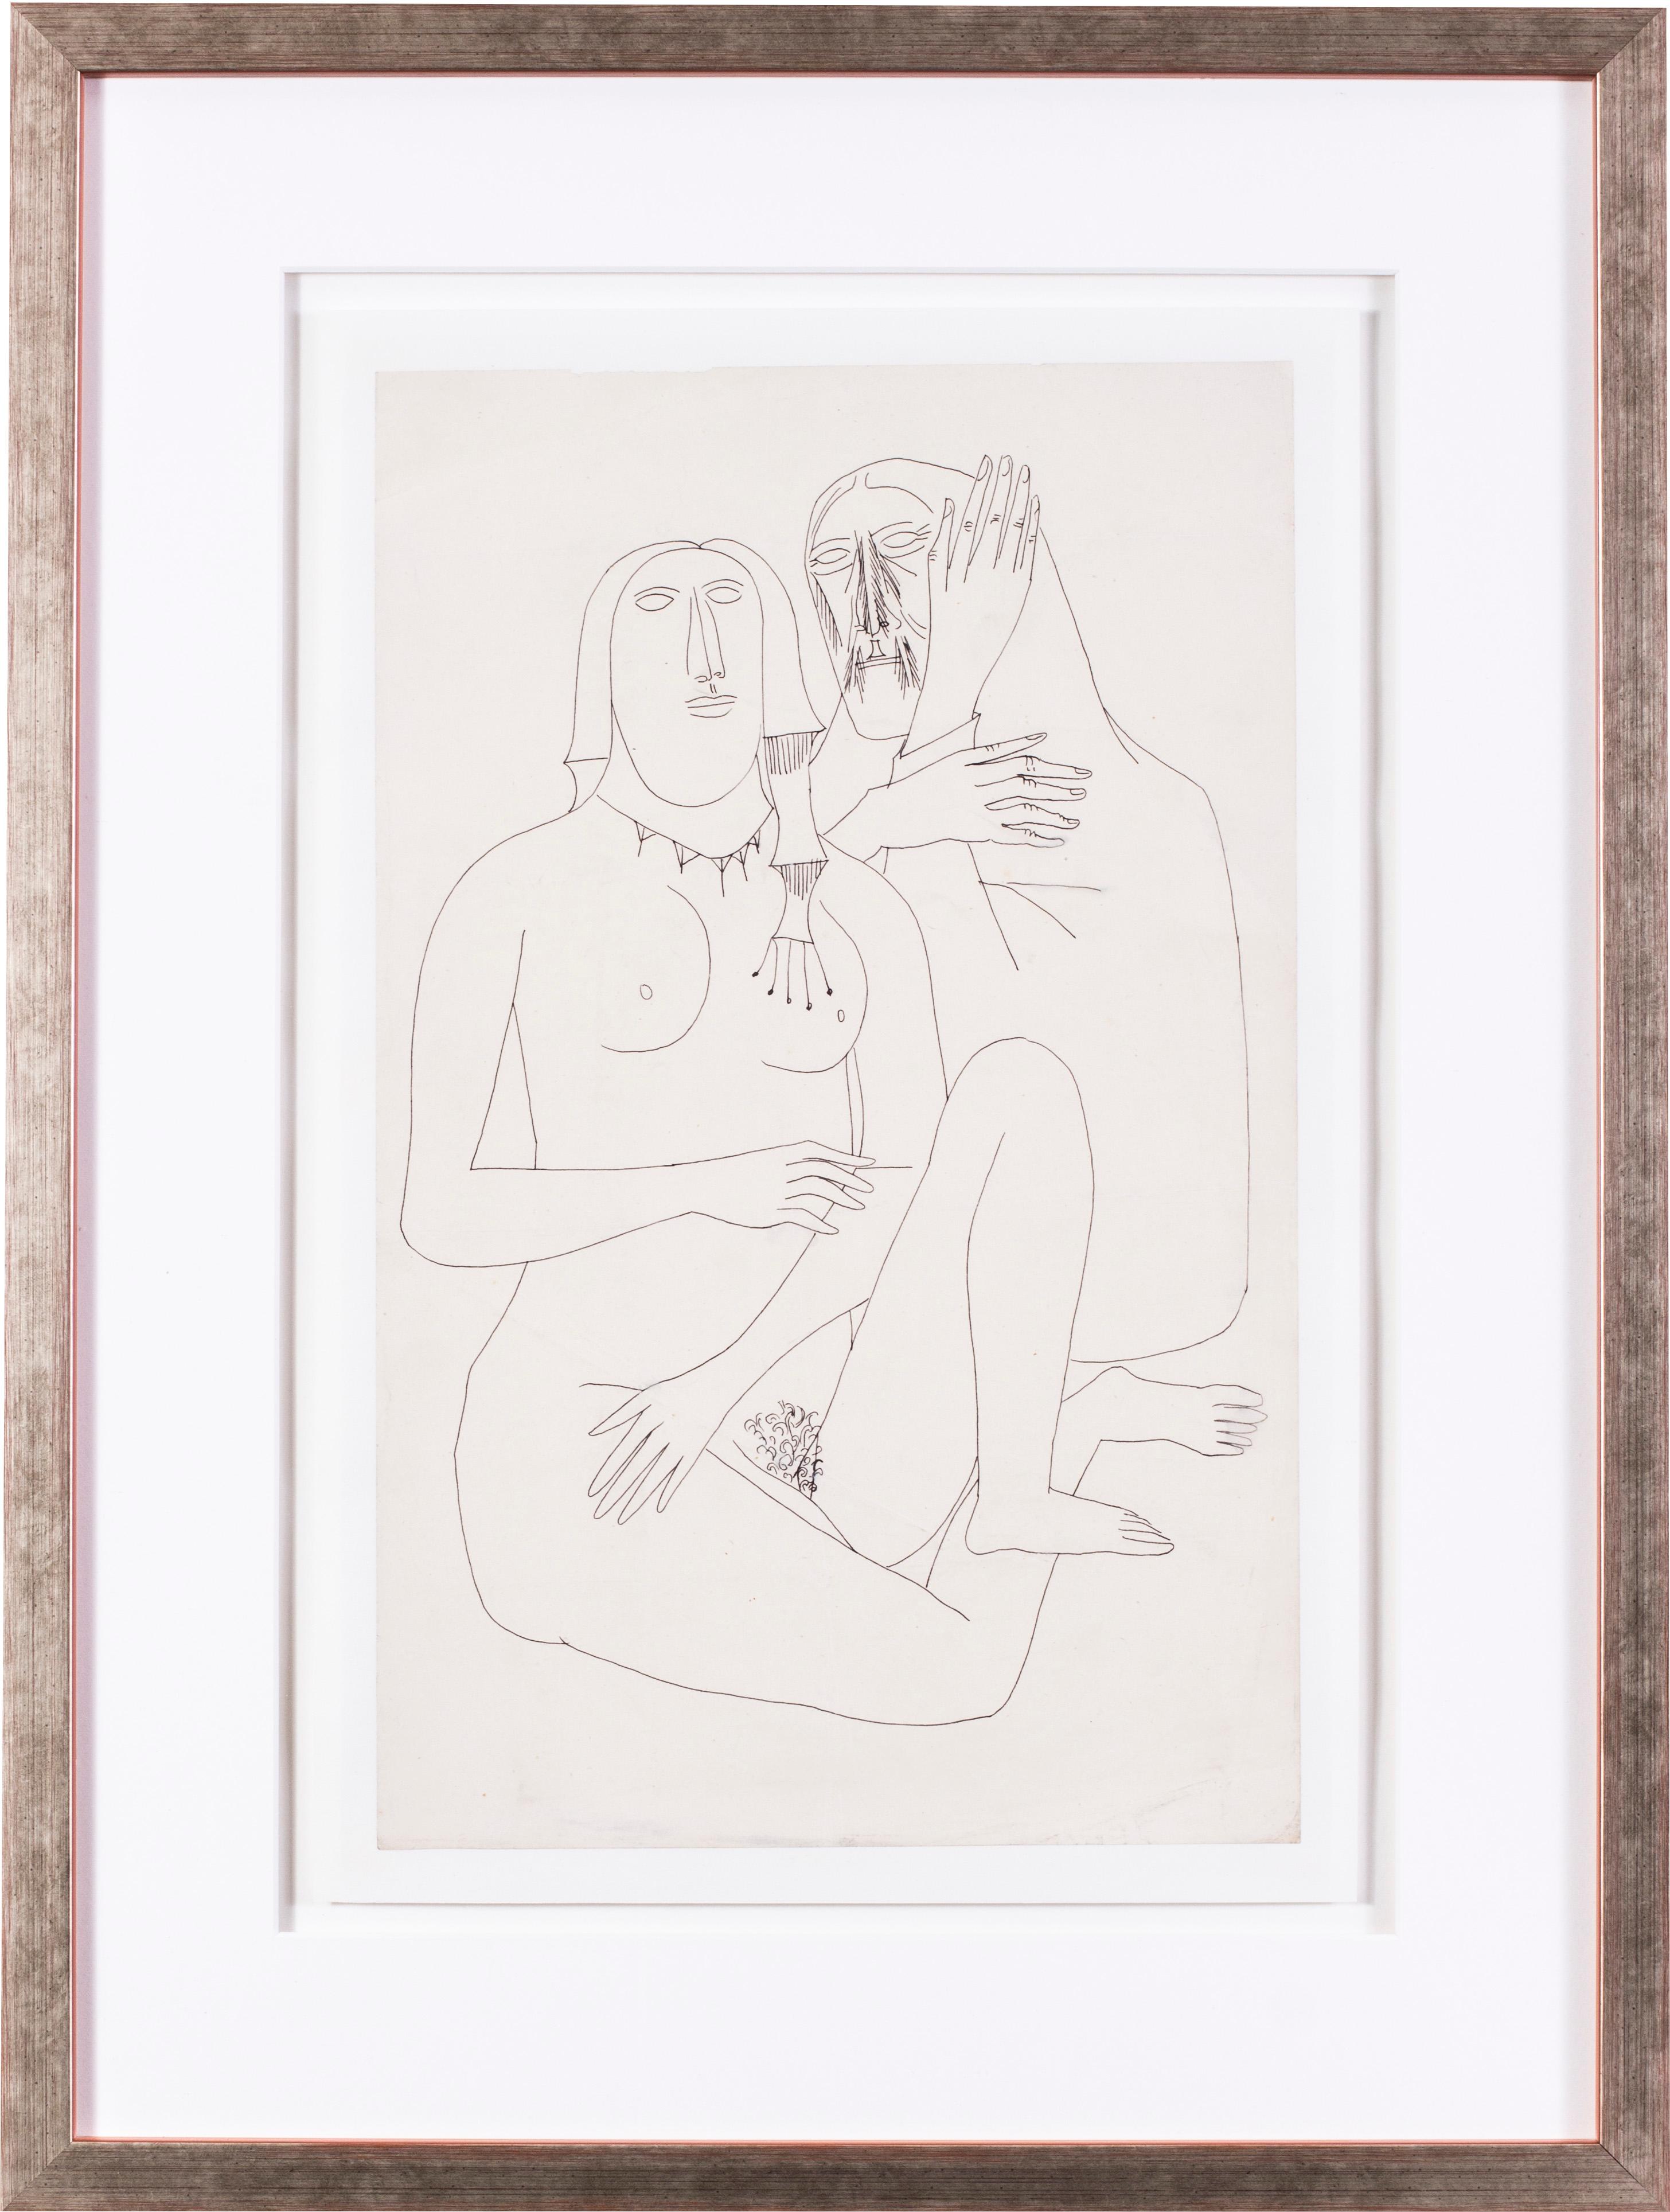 FRANCIS NEWTON SOUZA Figurative Art - Souza, Indian 20th Century artist, drawing of two nudes